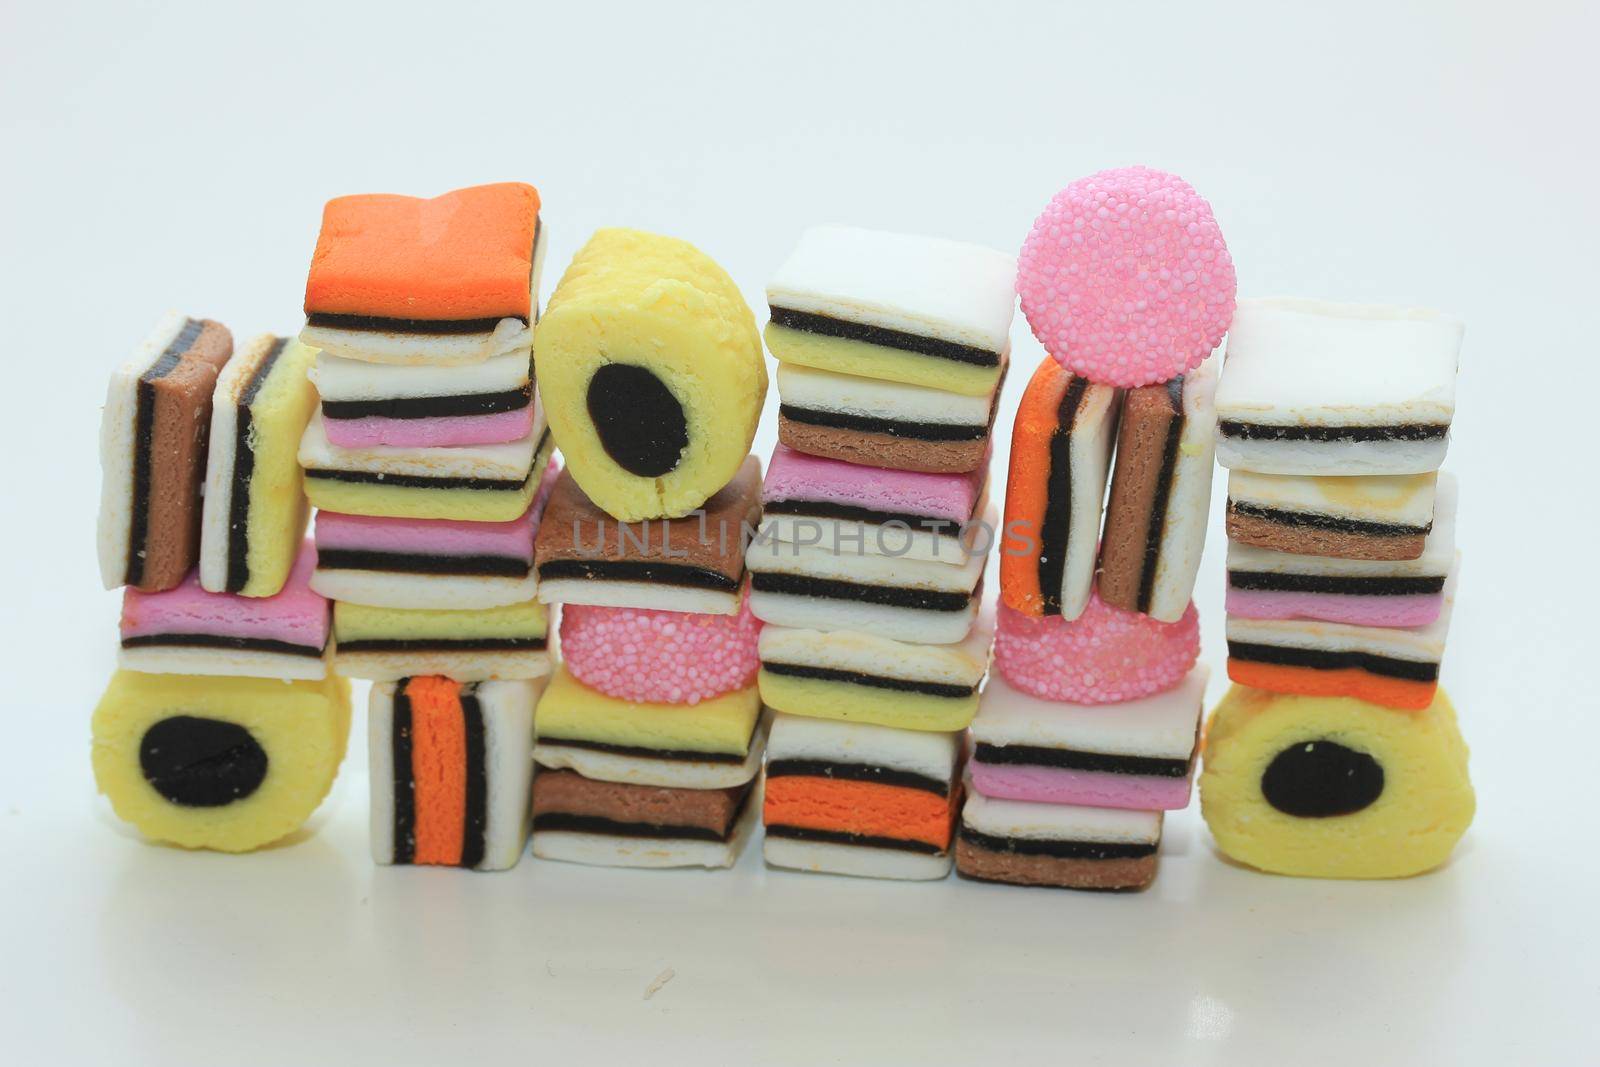 Stacked liquorice allsorts in different shapes, colors and sizes by studioportosabbia